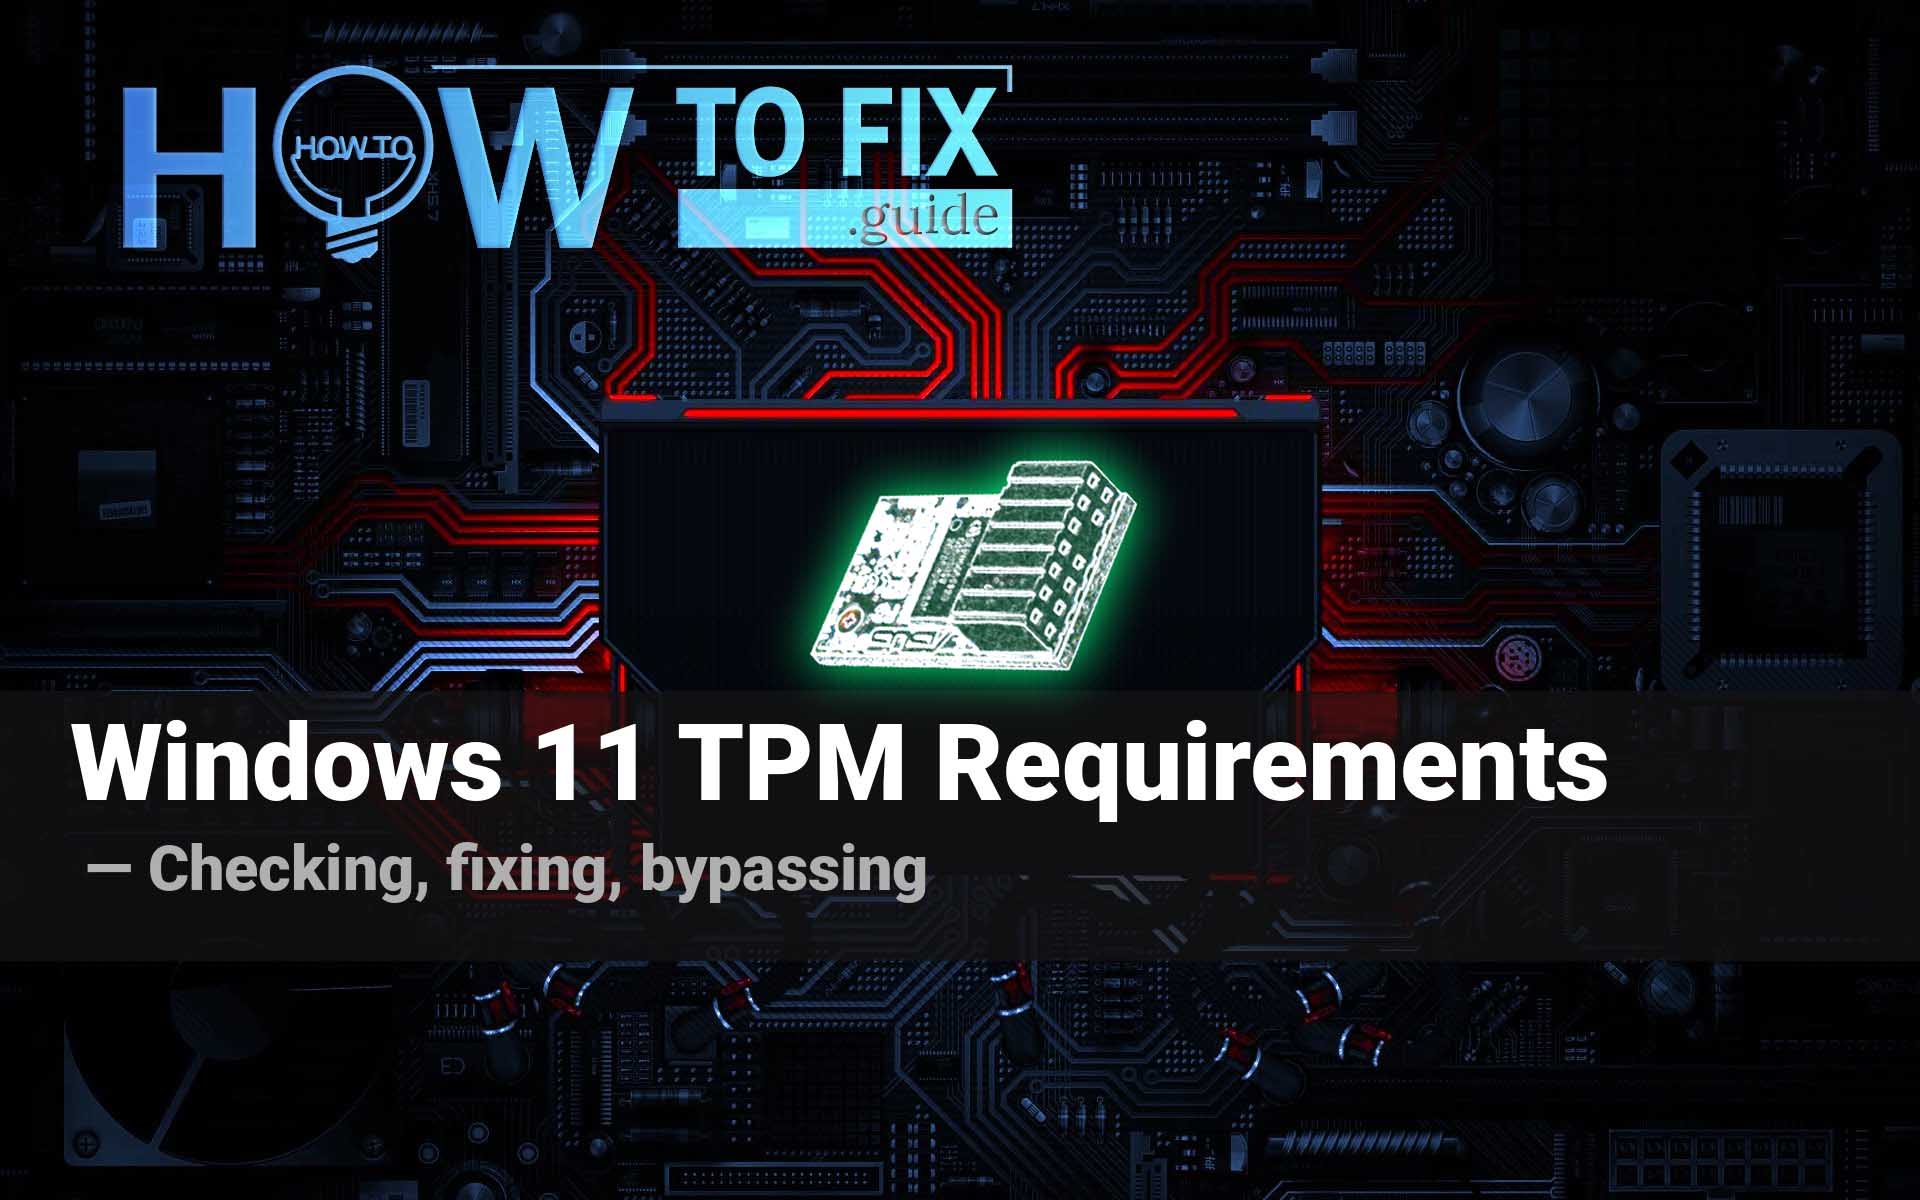 Windows 11 TPM Requirements. Checking, fixing, bypassing